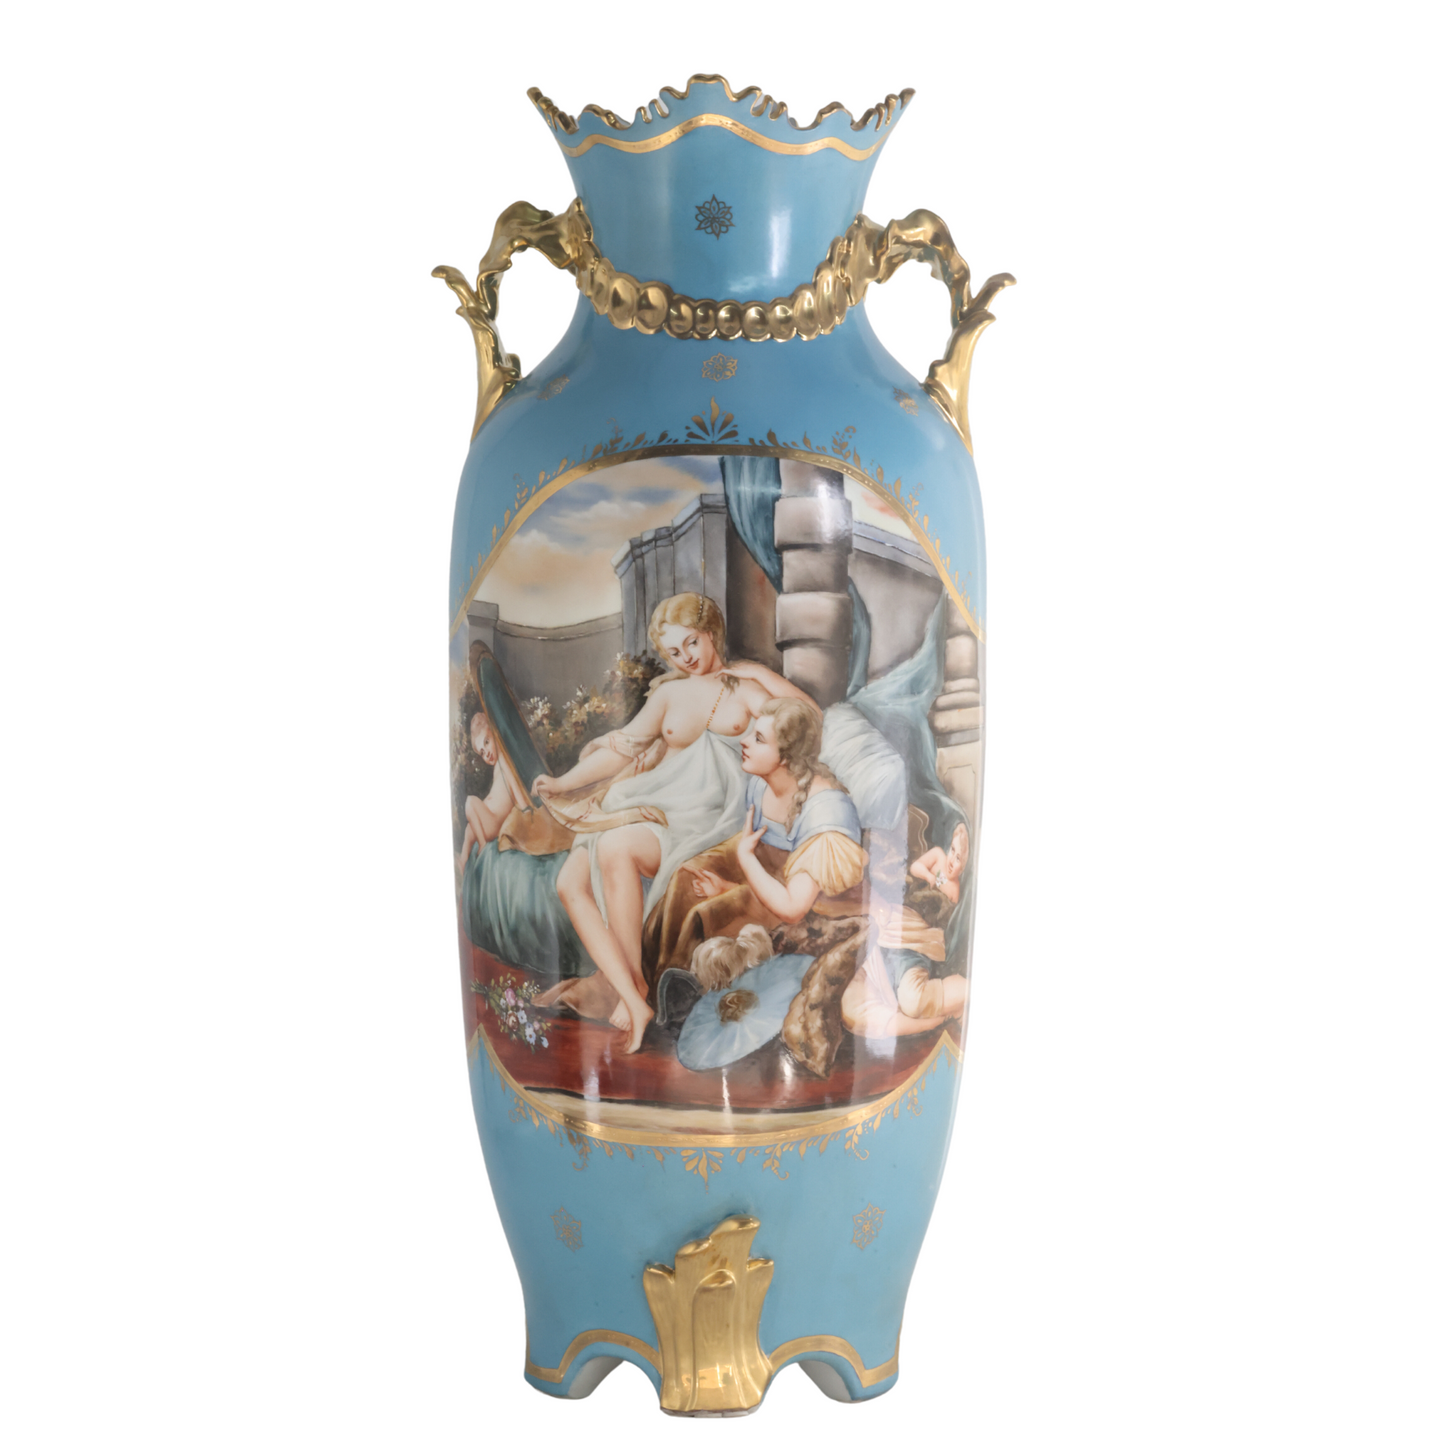 Rococo Style Vase with Hand-painted Motif